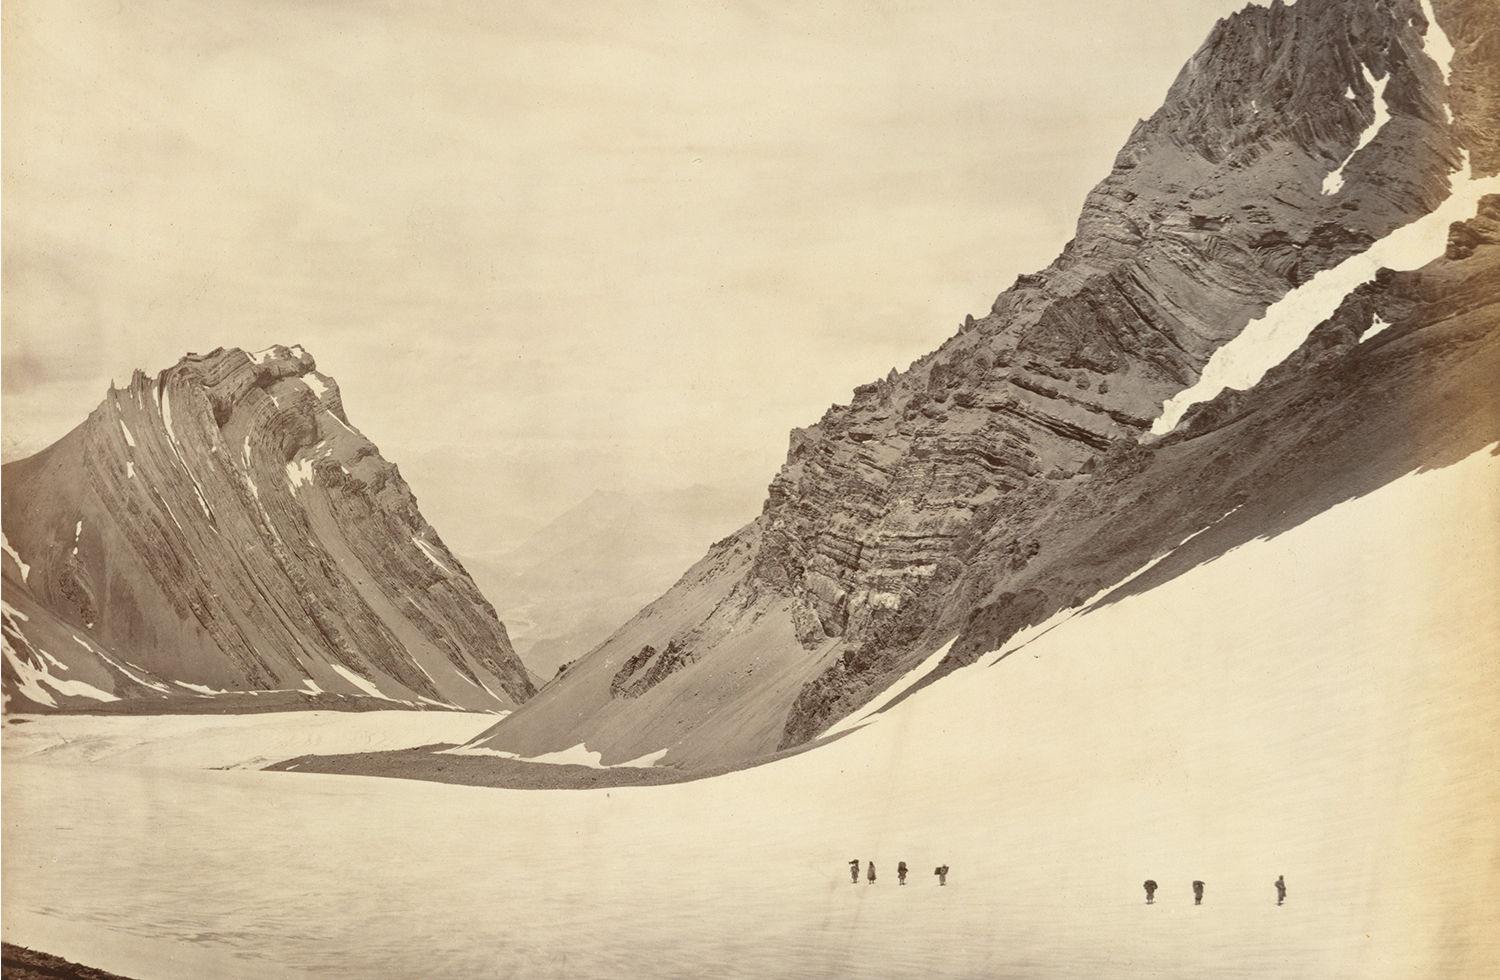 A sepia-toned photograph of the Manirung Pass in the Himalayas, with mountains covered in snow.